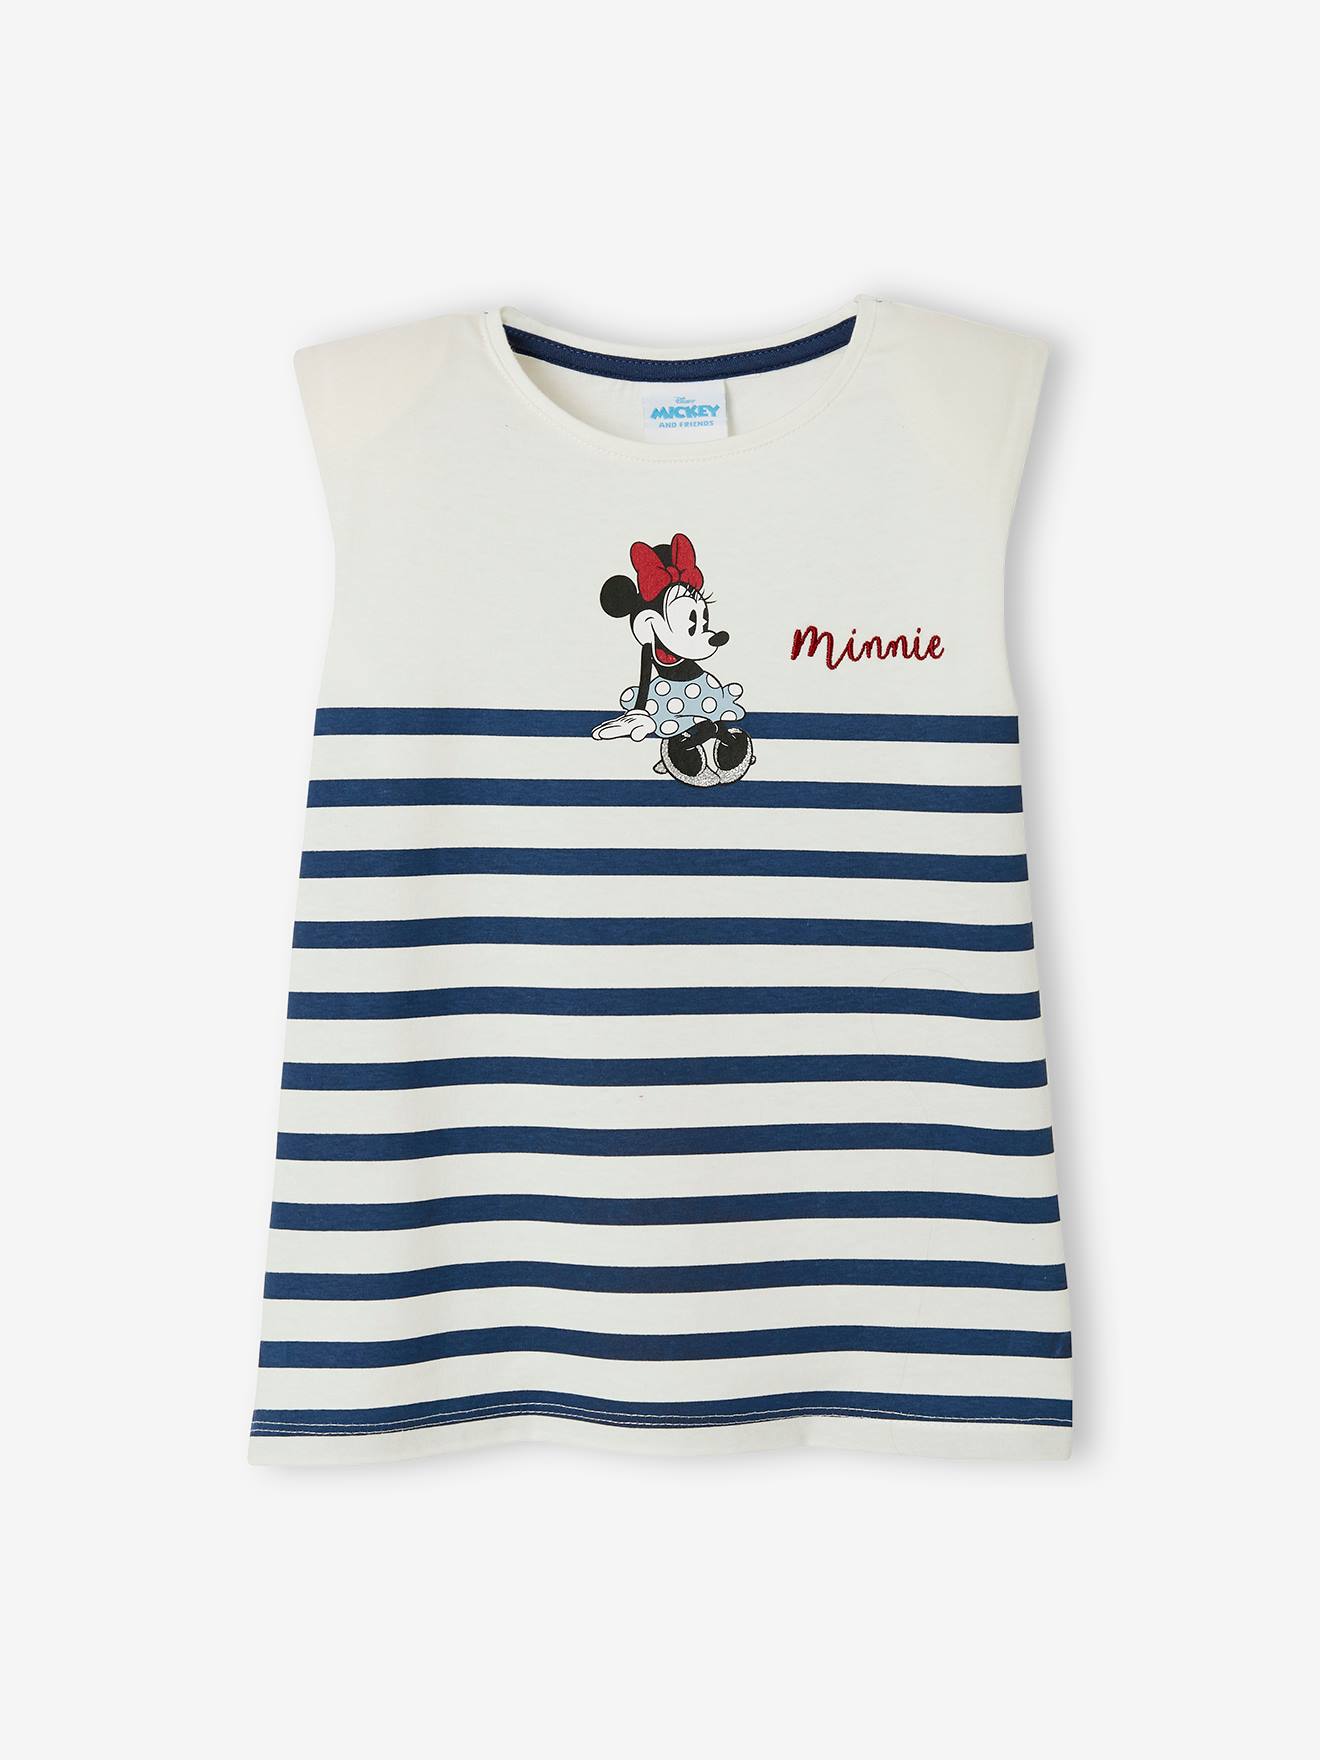 Minnie Mouse T-shirt by Disney(r), for Girls beige light striped